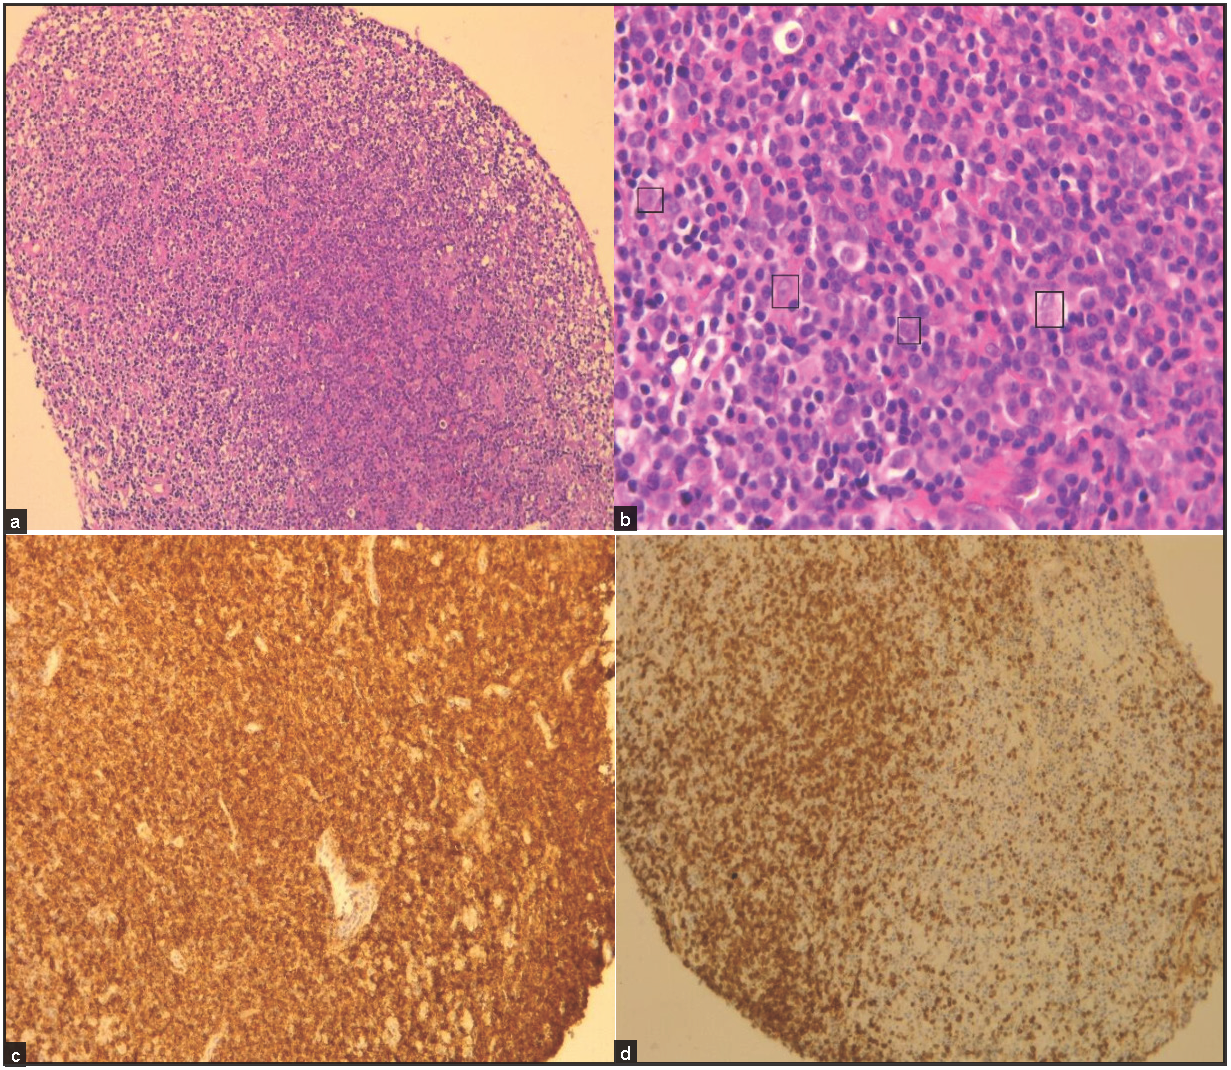 (a, b) Infiltrate of small mature appearing lymphocytes, abundant histiocytes, and large centroblasts and immunoblasts (black square) dispersed throughout the mucosa (a: microscopic magnification x100, b: microscopic magnification x400). Neoplastic cells stained positive for CD20 (c) and CD3 (d).